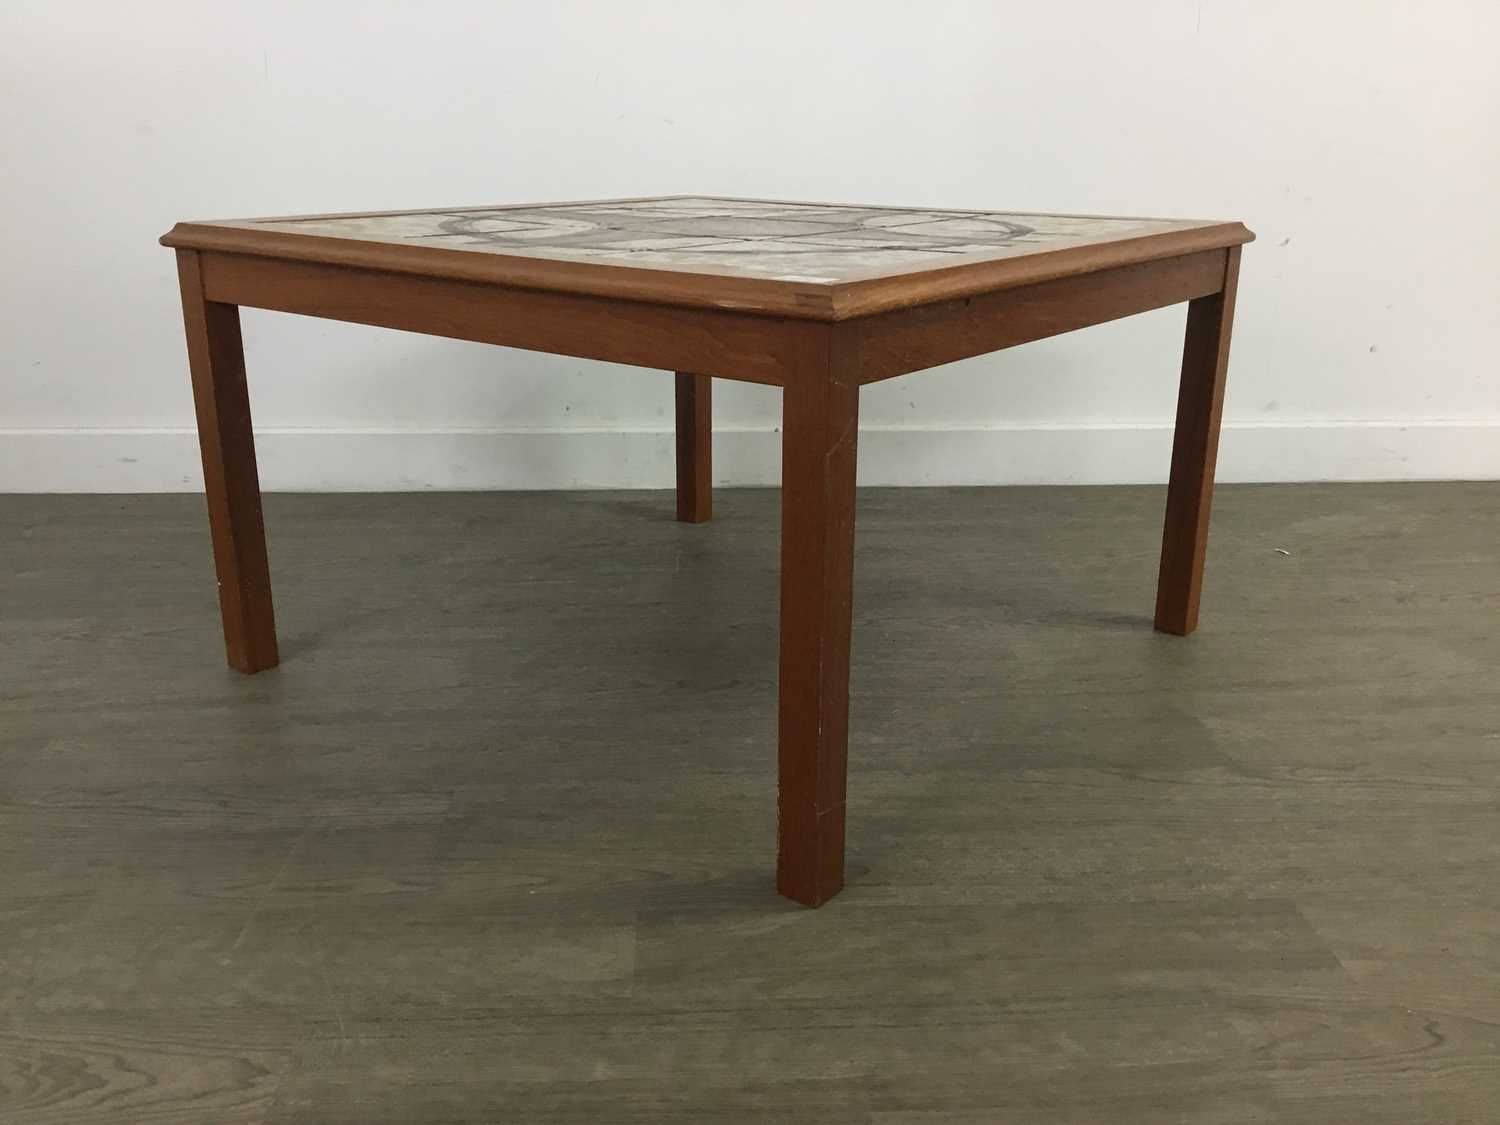 A DANISH TEAK TILE-TOPPED COFFEE TABLE